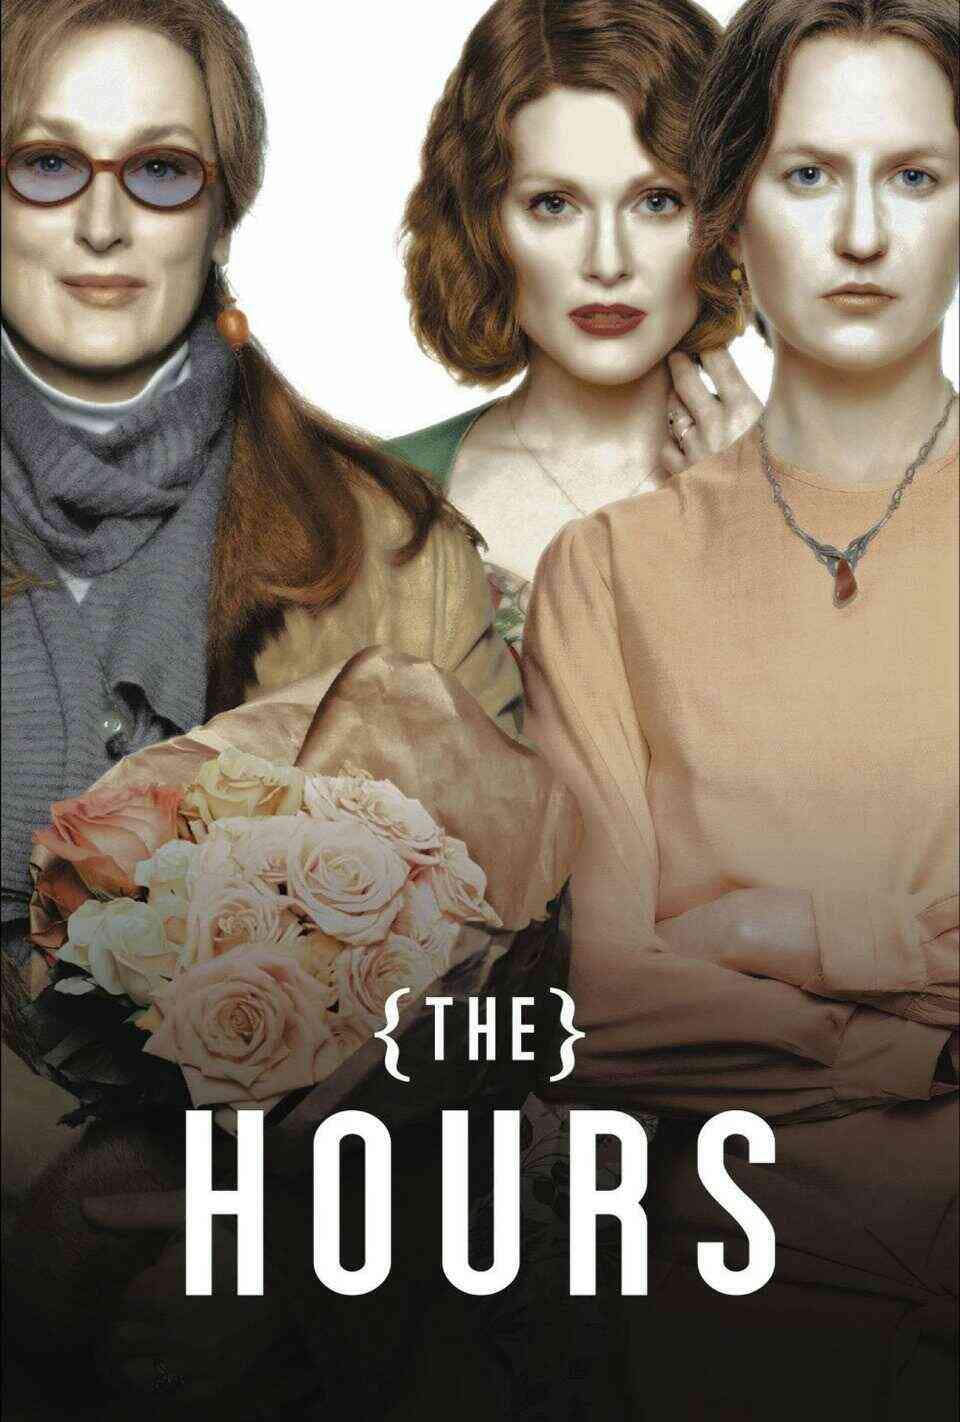 Read The Hours screenplay.